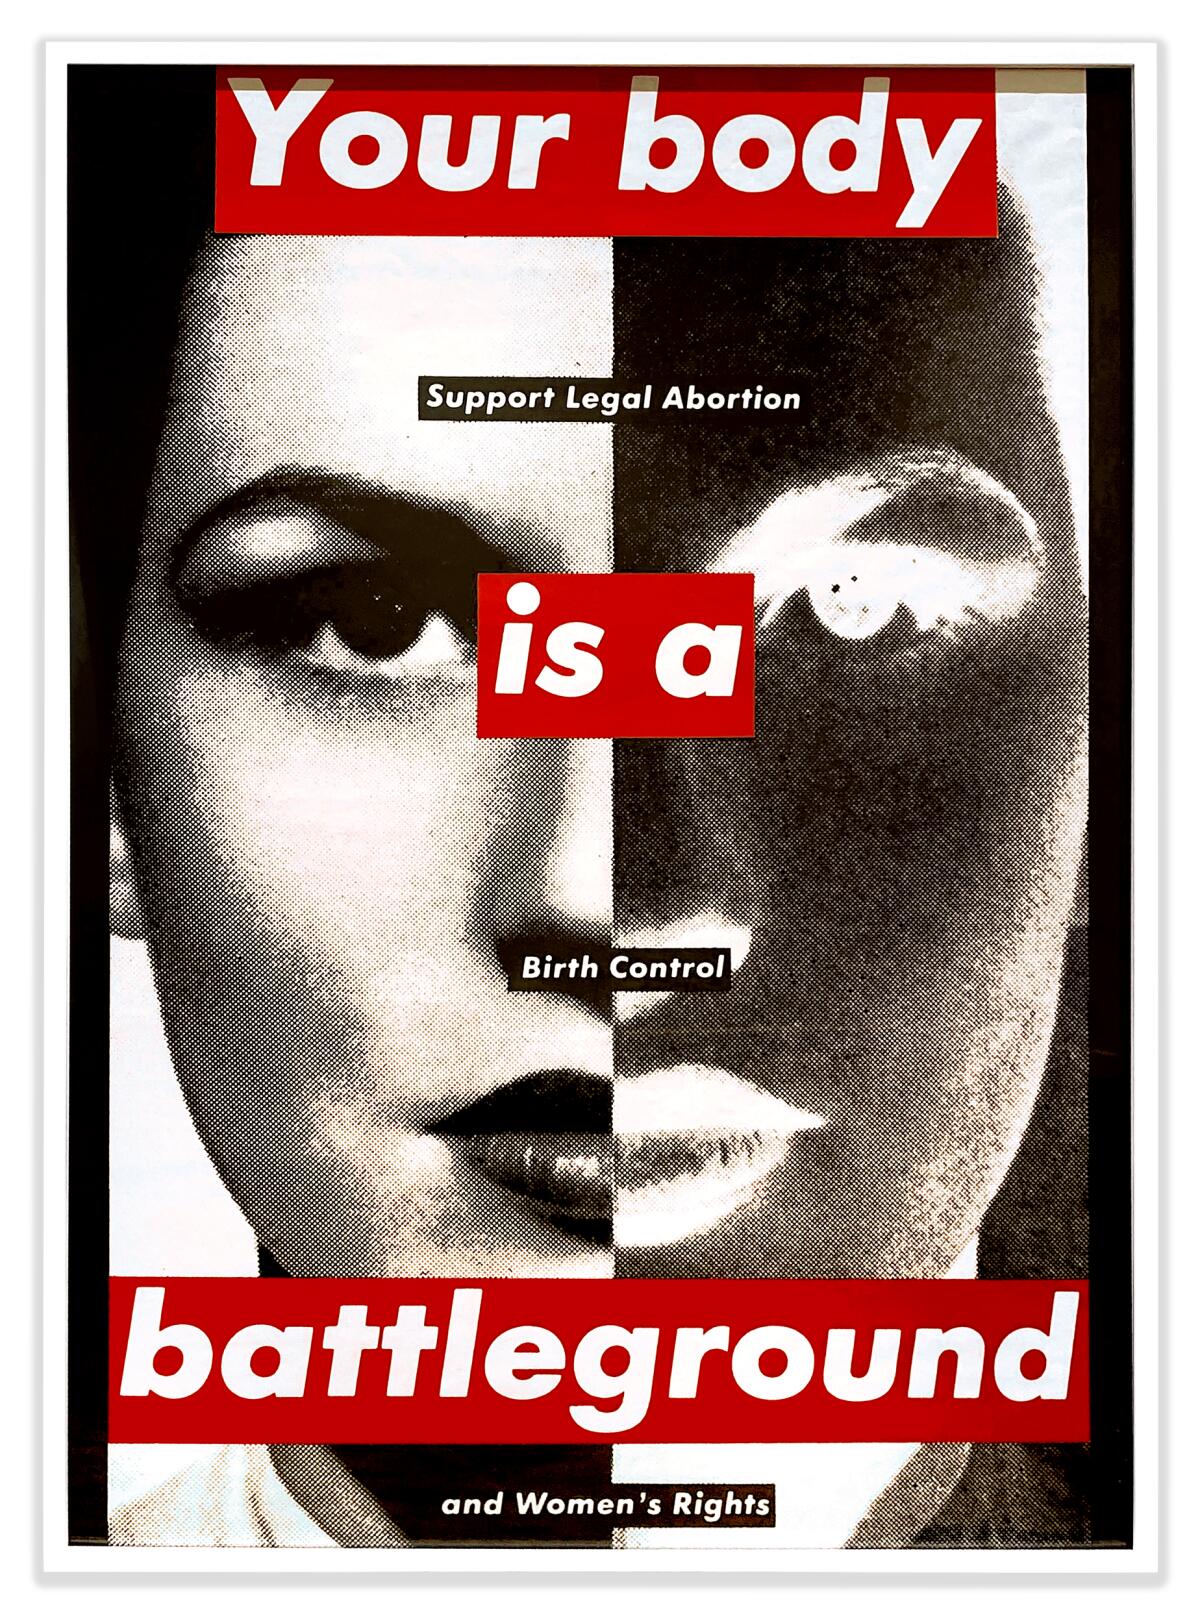 Barbara Kruger's artwork superimposes the words "Your body is a battleground" on a woman's bifurcated black-and-white face.